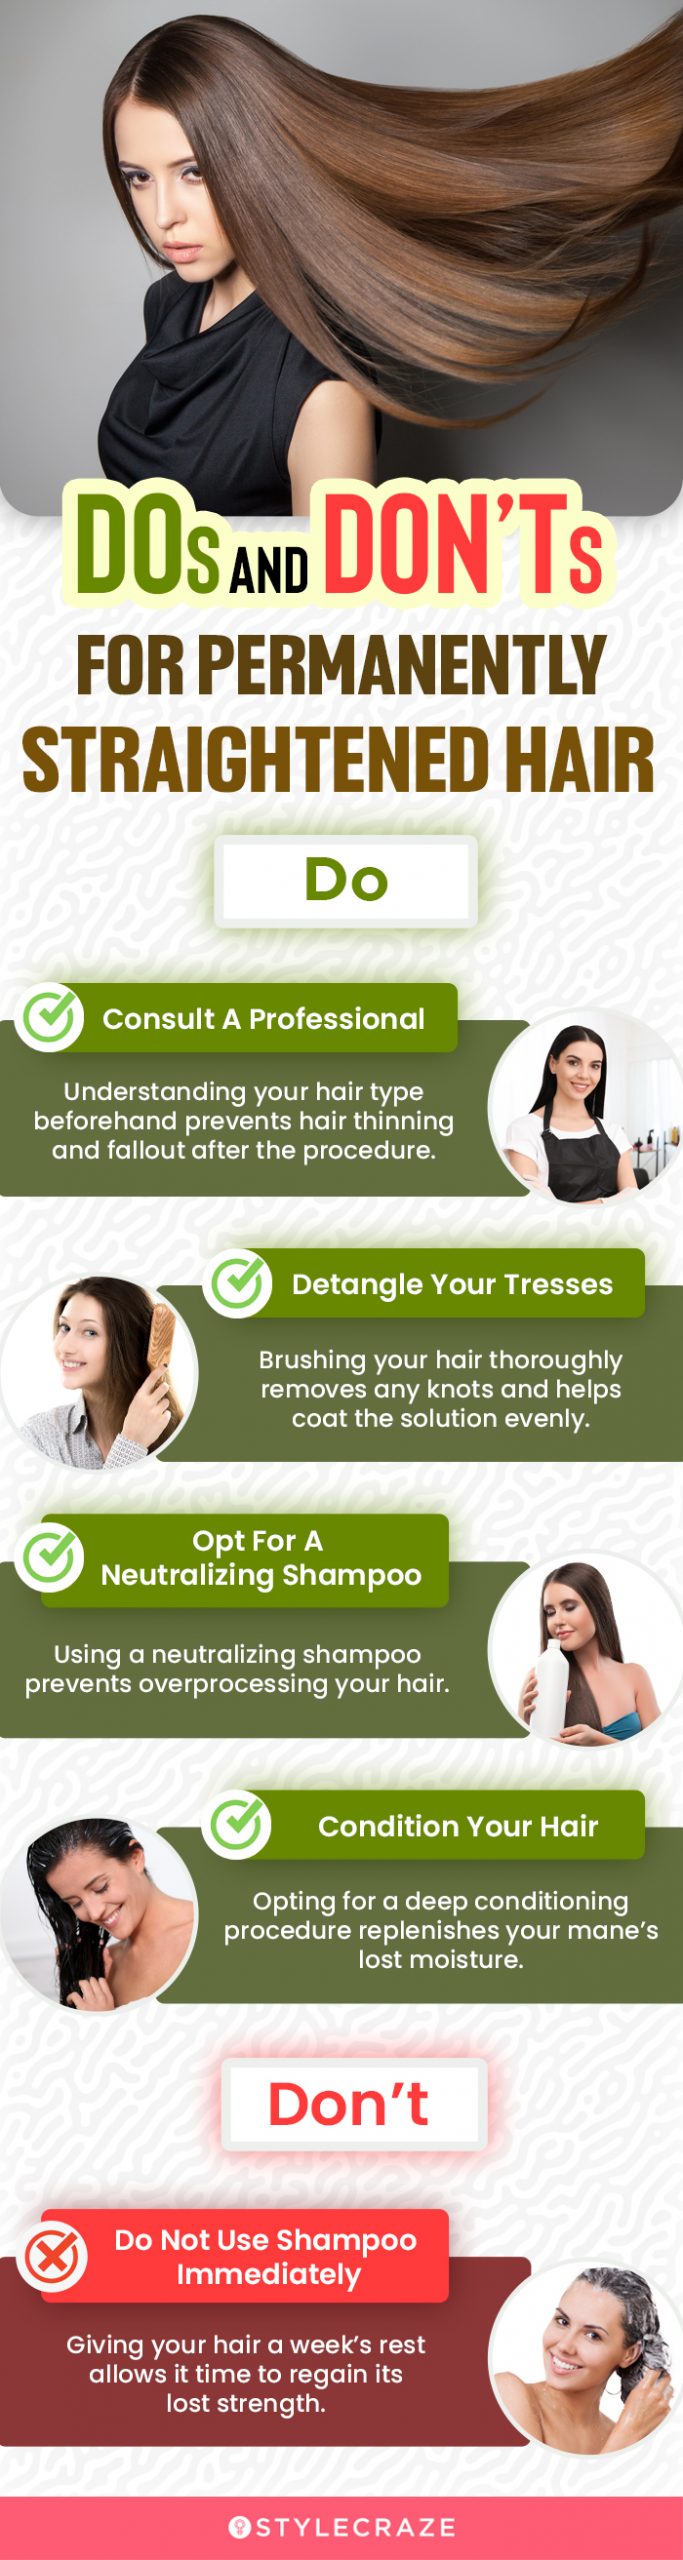 dos and don’ts for permanently straightened hair [infographic]